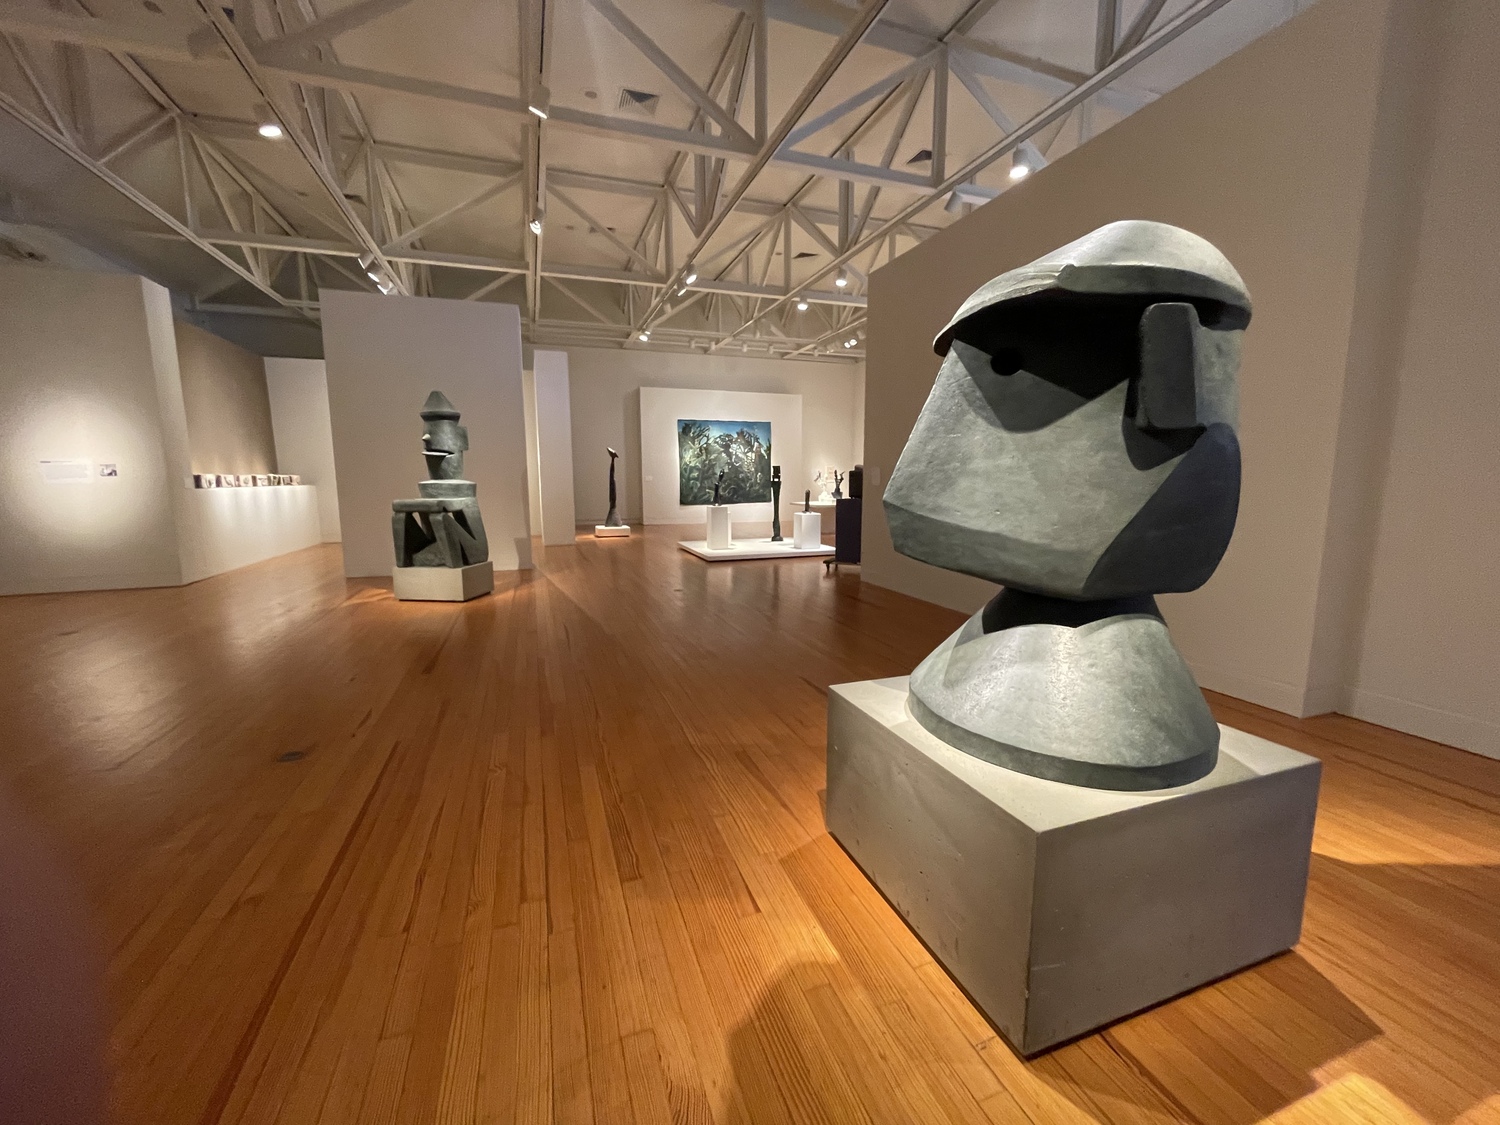 An installation view of Maui Arts & Cultural Center's exhibition “Max Ernst: Surreal Mindscapes & Characters” featuring work from the collection of Eric Ernst, the artist's grandson and a longtime East End resident. ERIC ERNST PHOTO